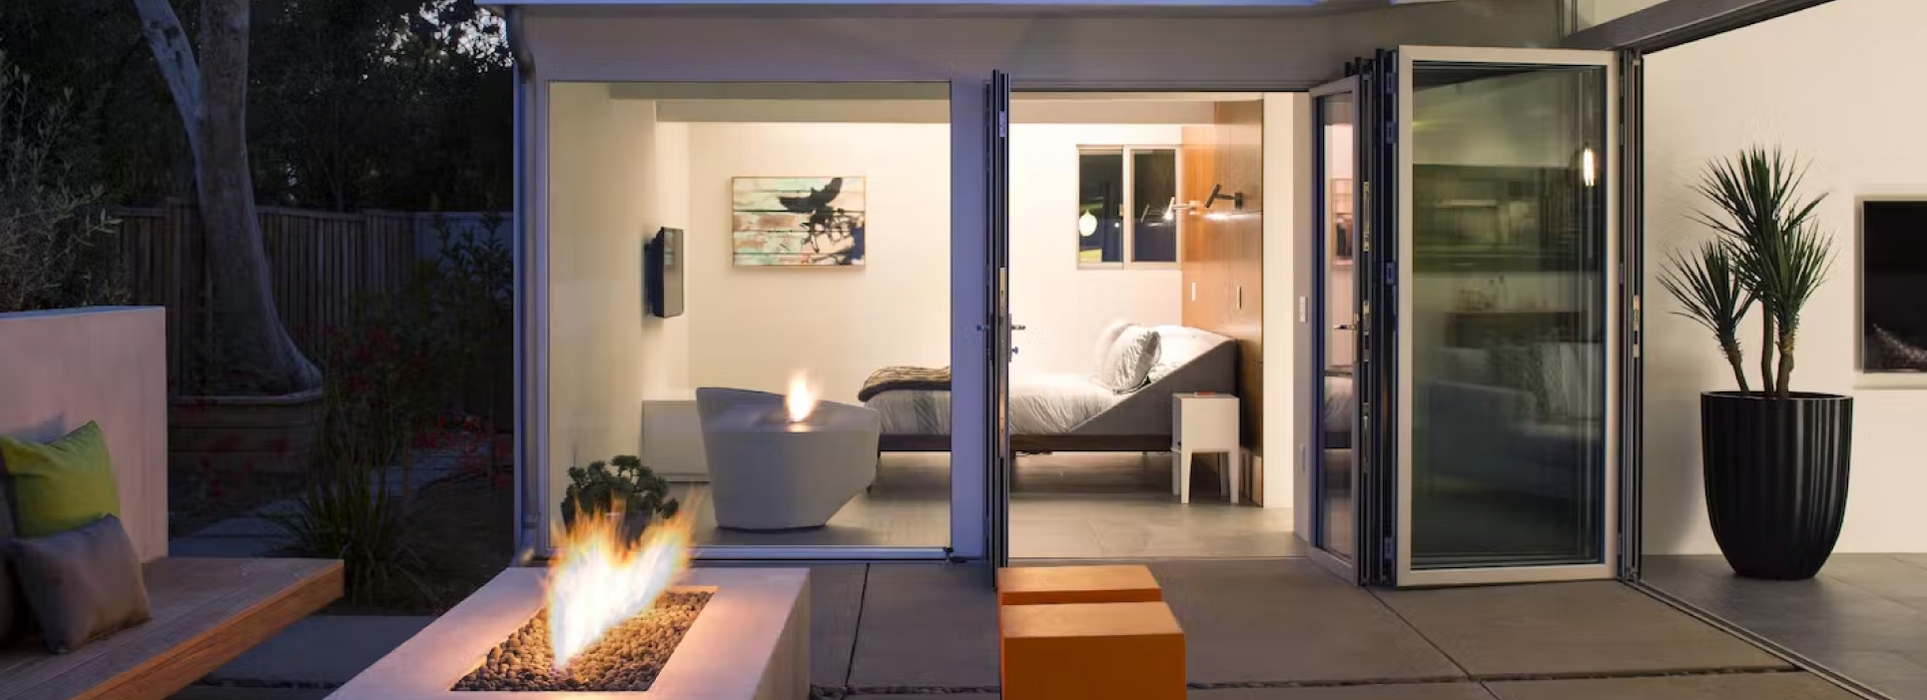 Top Home Improvement Ideas With These Smart Devices